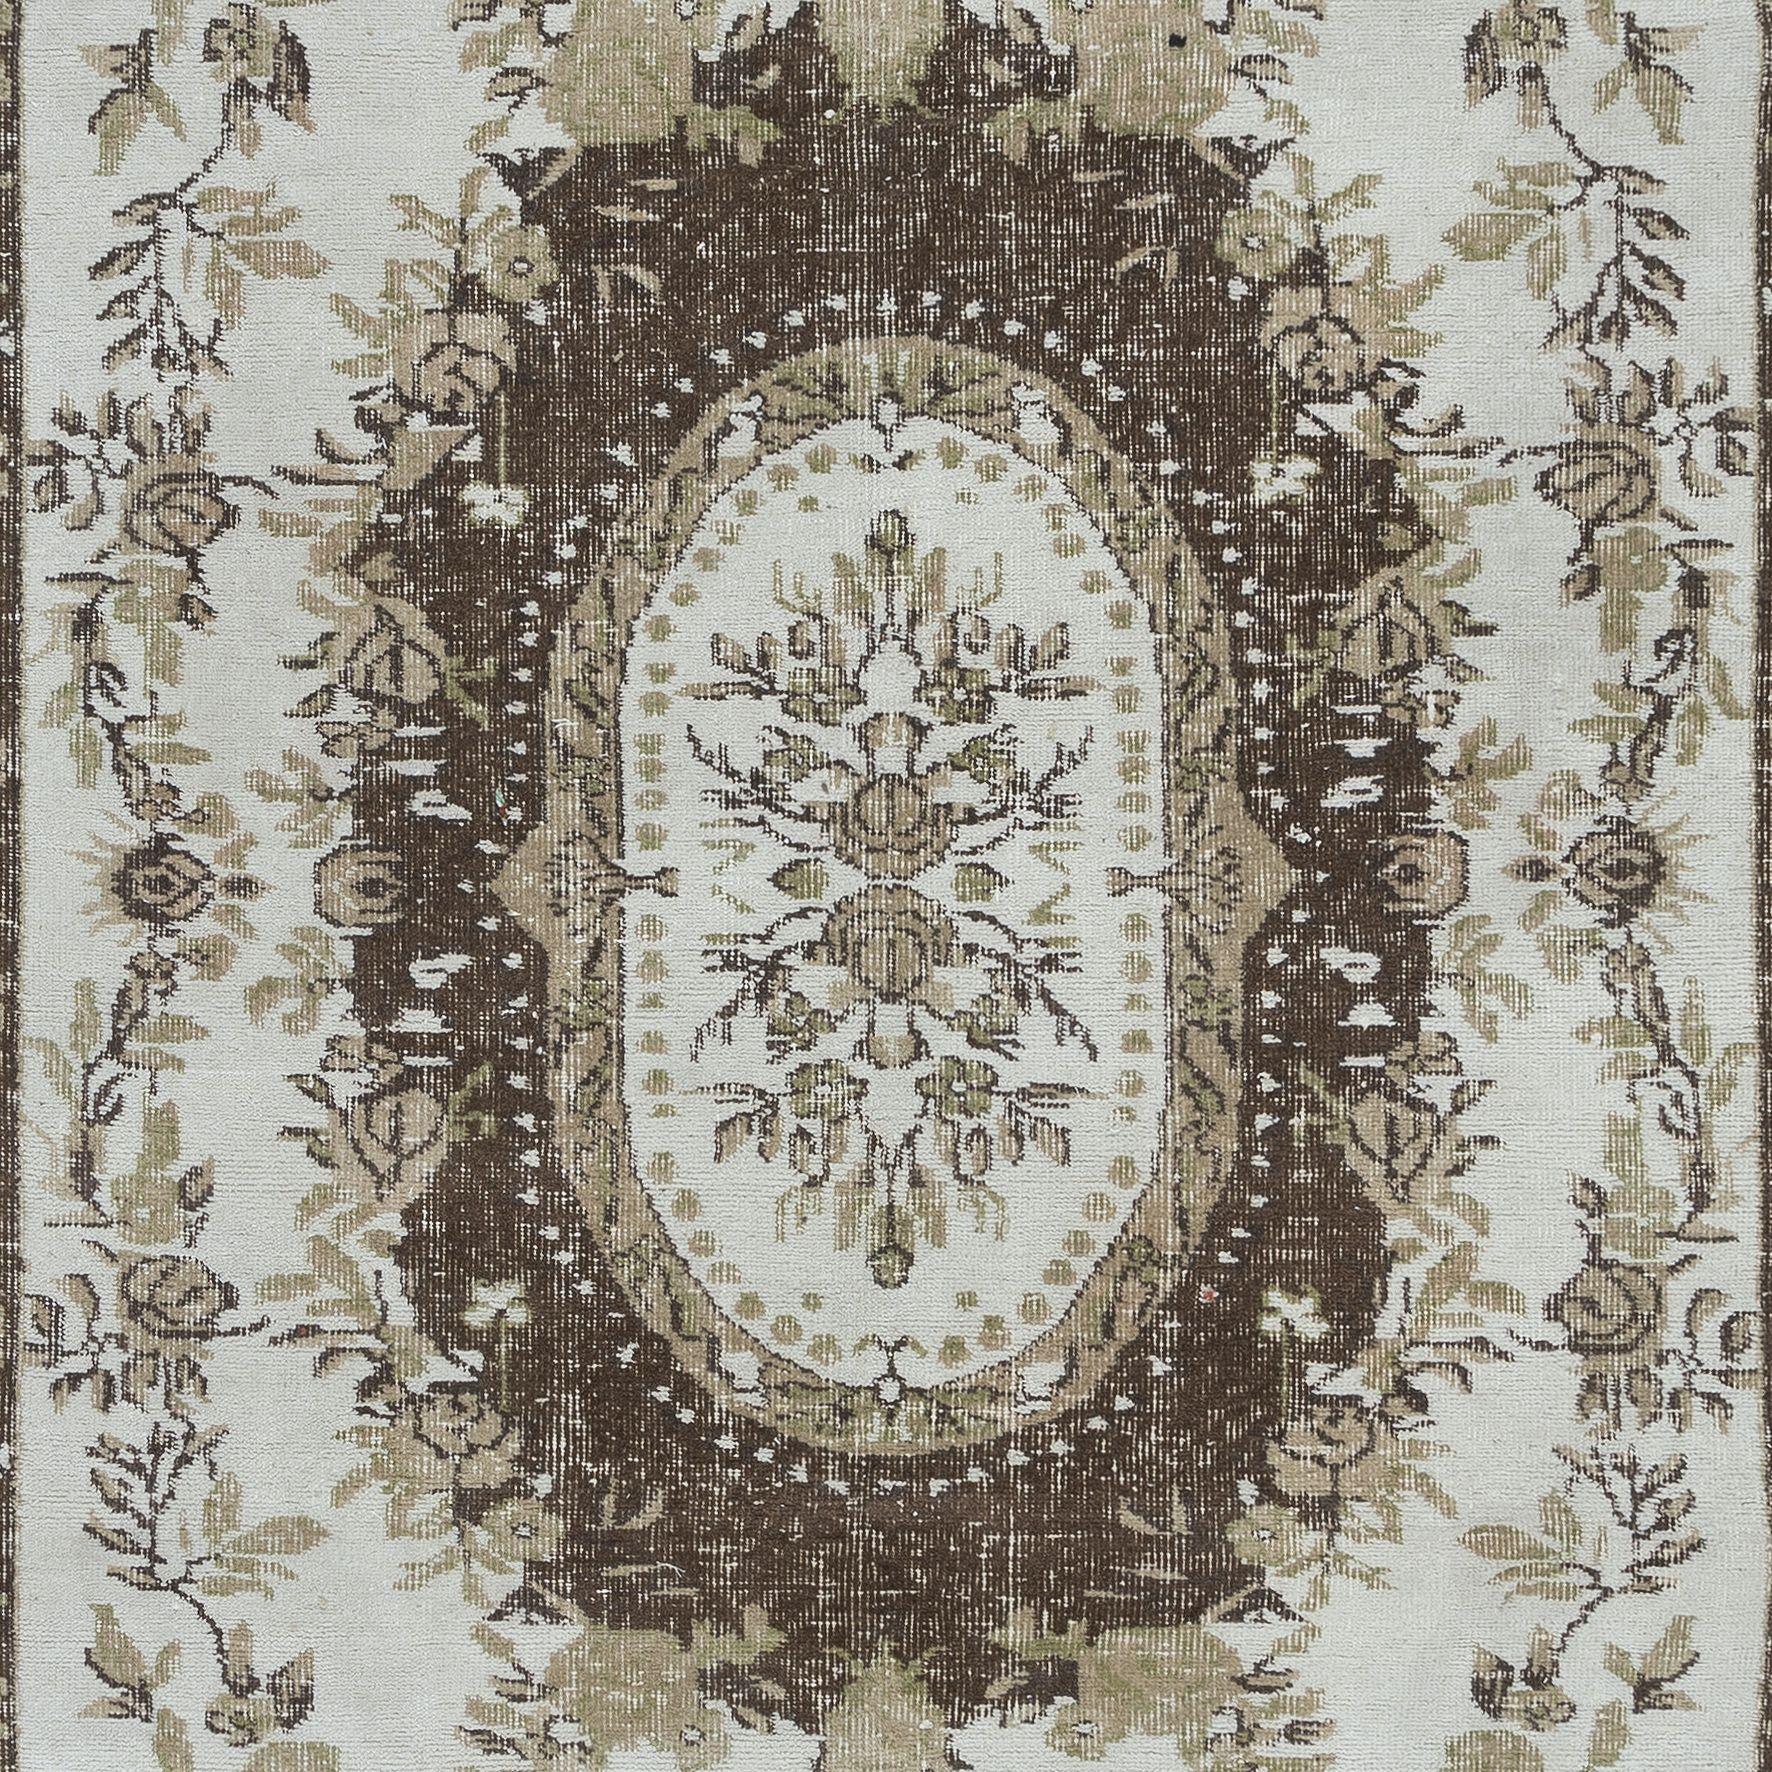 5.4x8.4 Ft Classic Aubusson Inspired Vintage Handmade Faded Rug in Beige & Brown In Good Condition For Sale In Philadelphia, PA